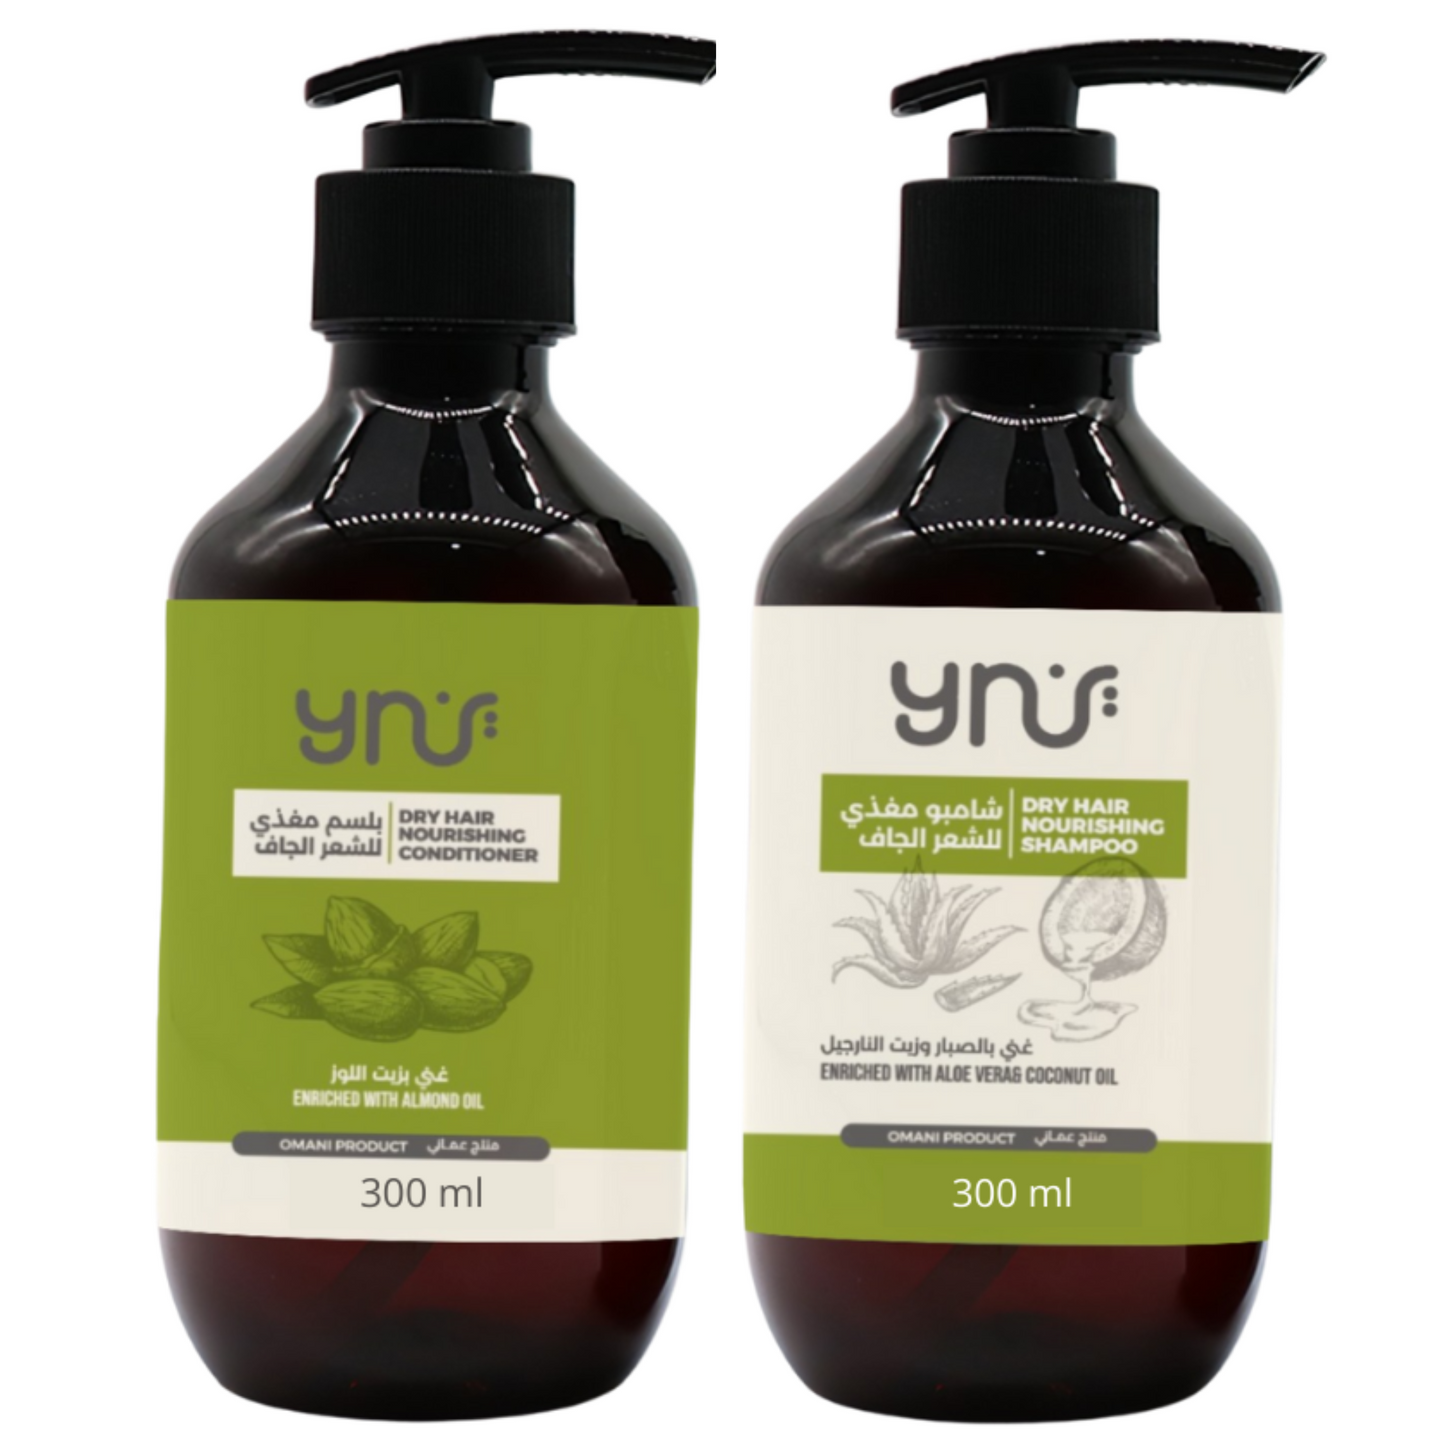 Dry & Normal hair Shampoo & Conditioner